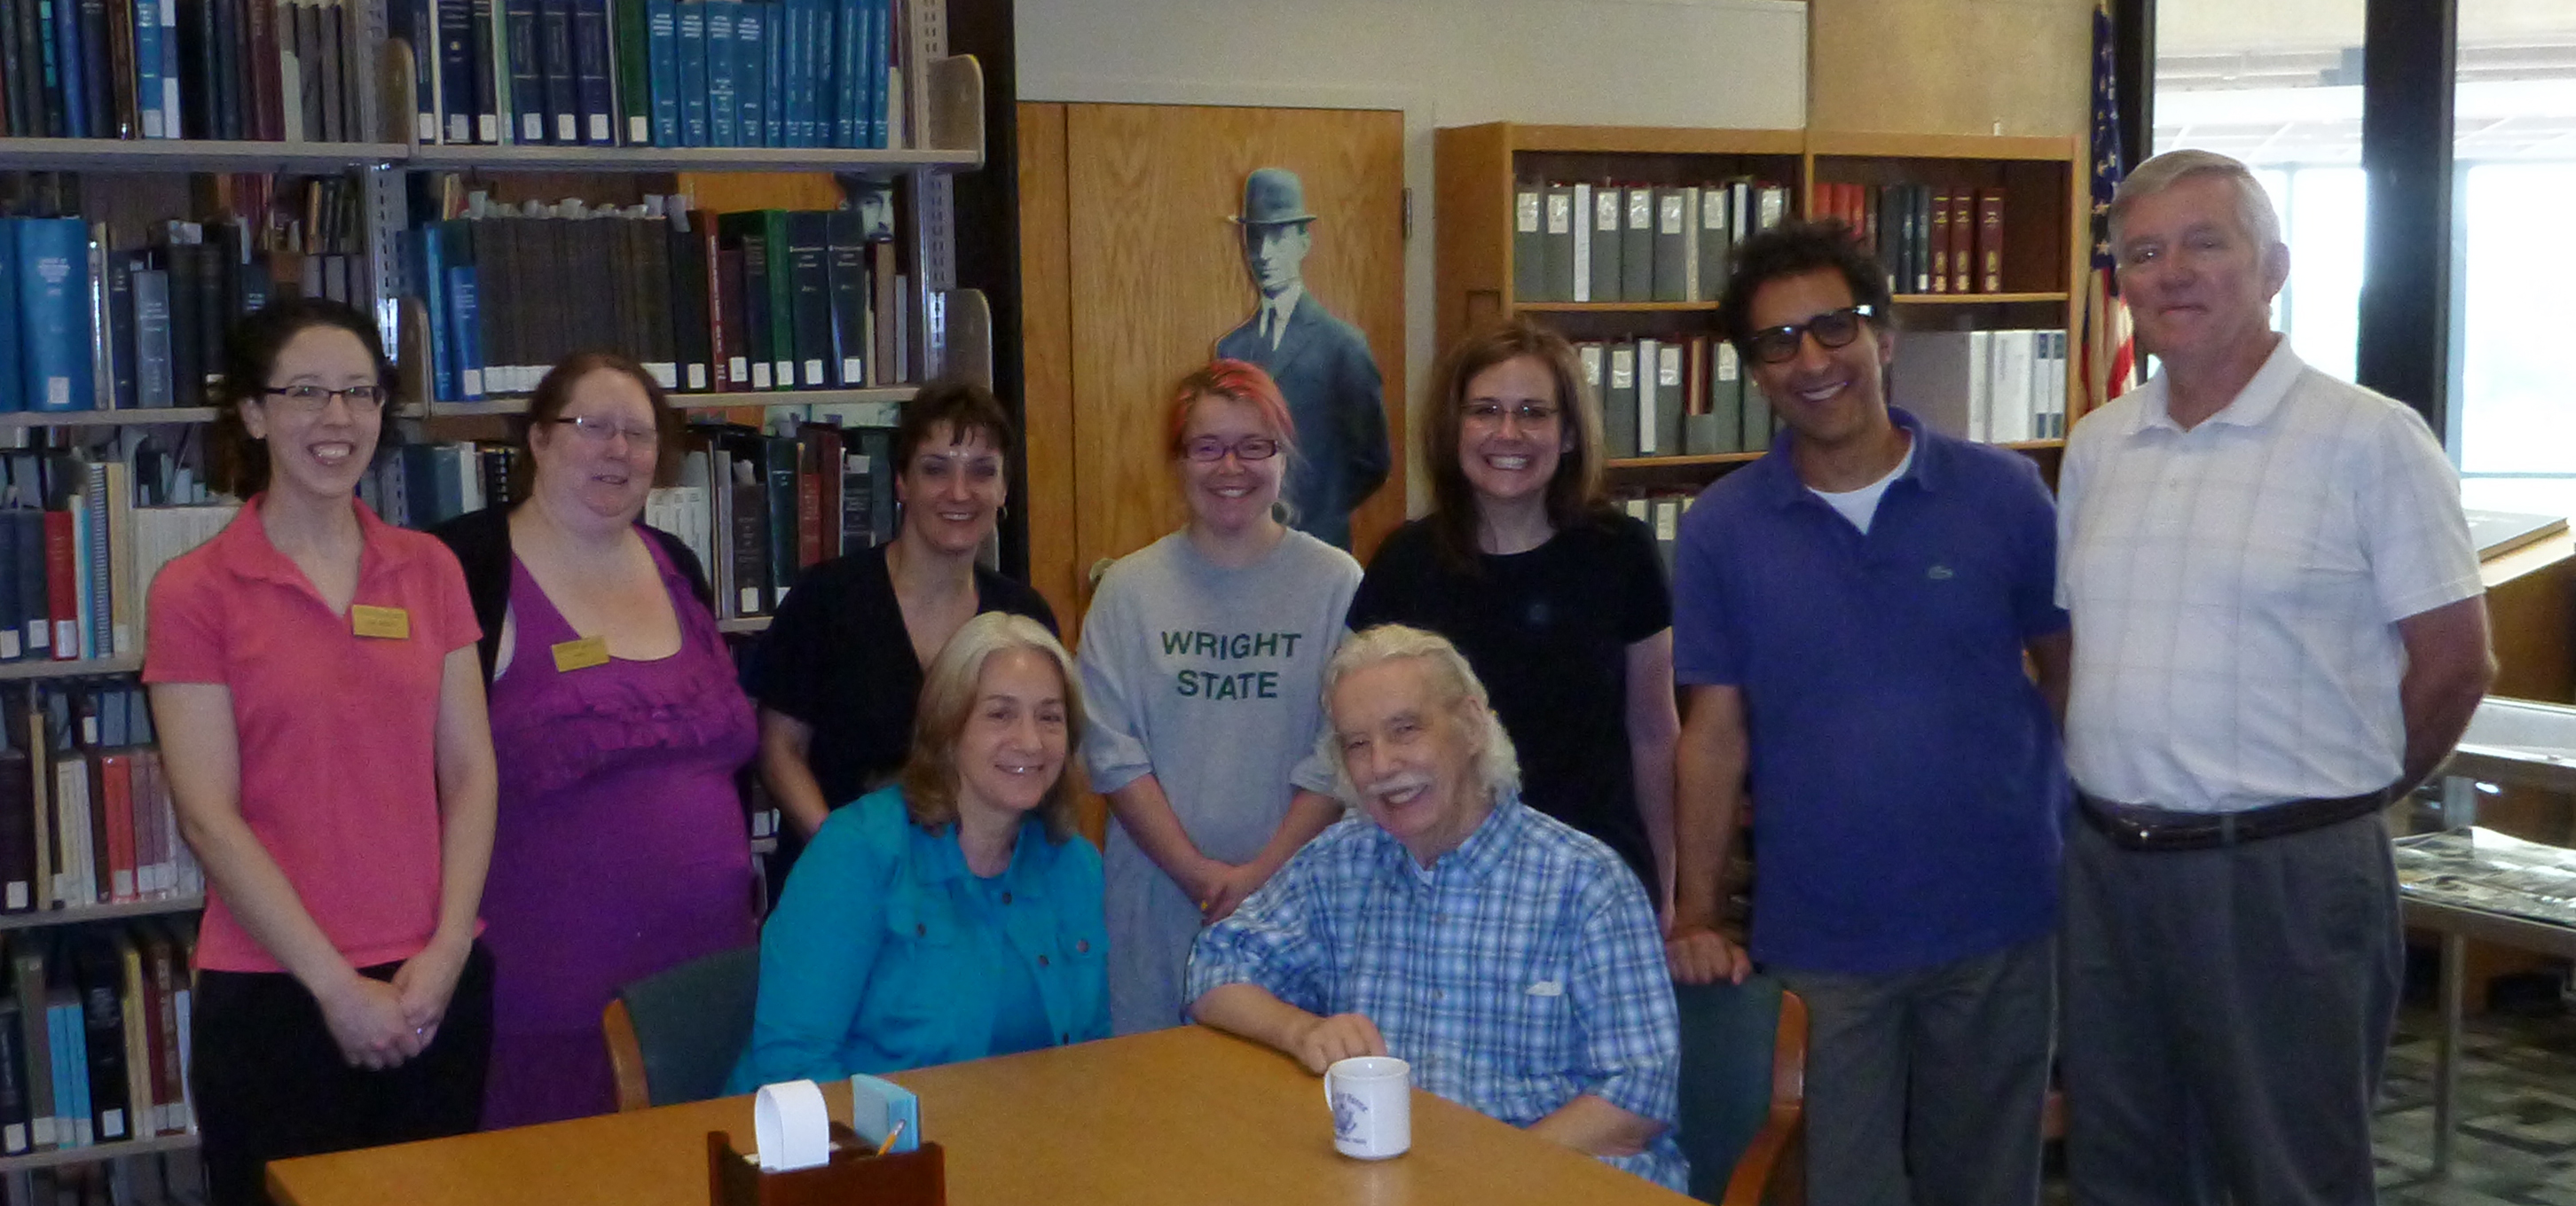 Archives staff with Dale Huffman during a visit to Special Collections and Archives, July 9, 2014